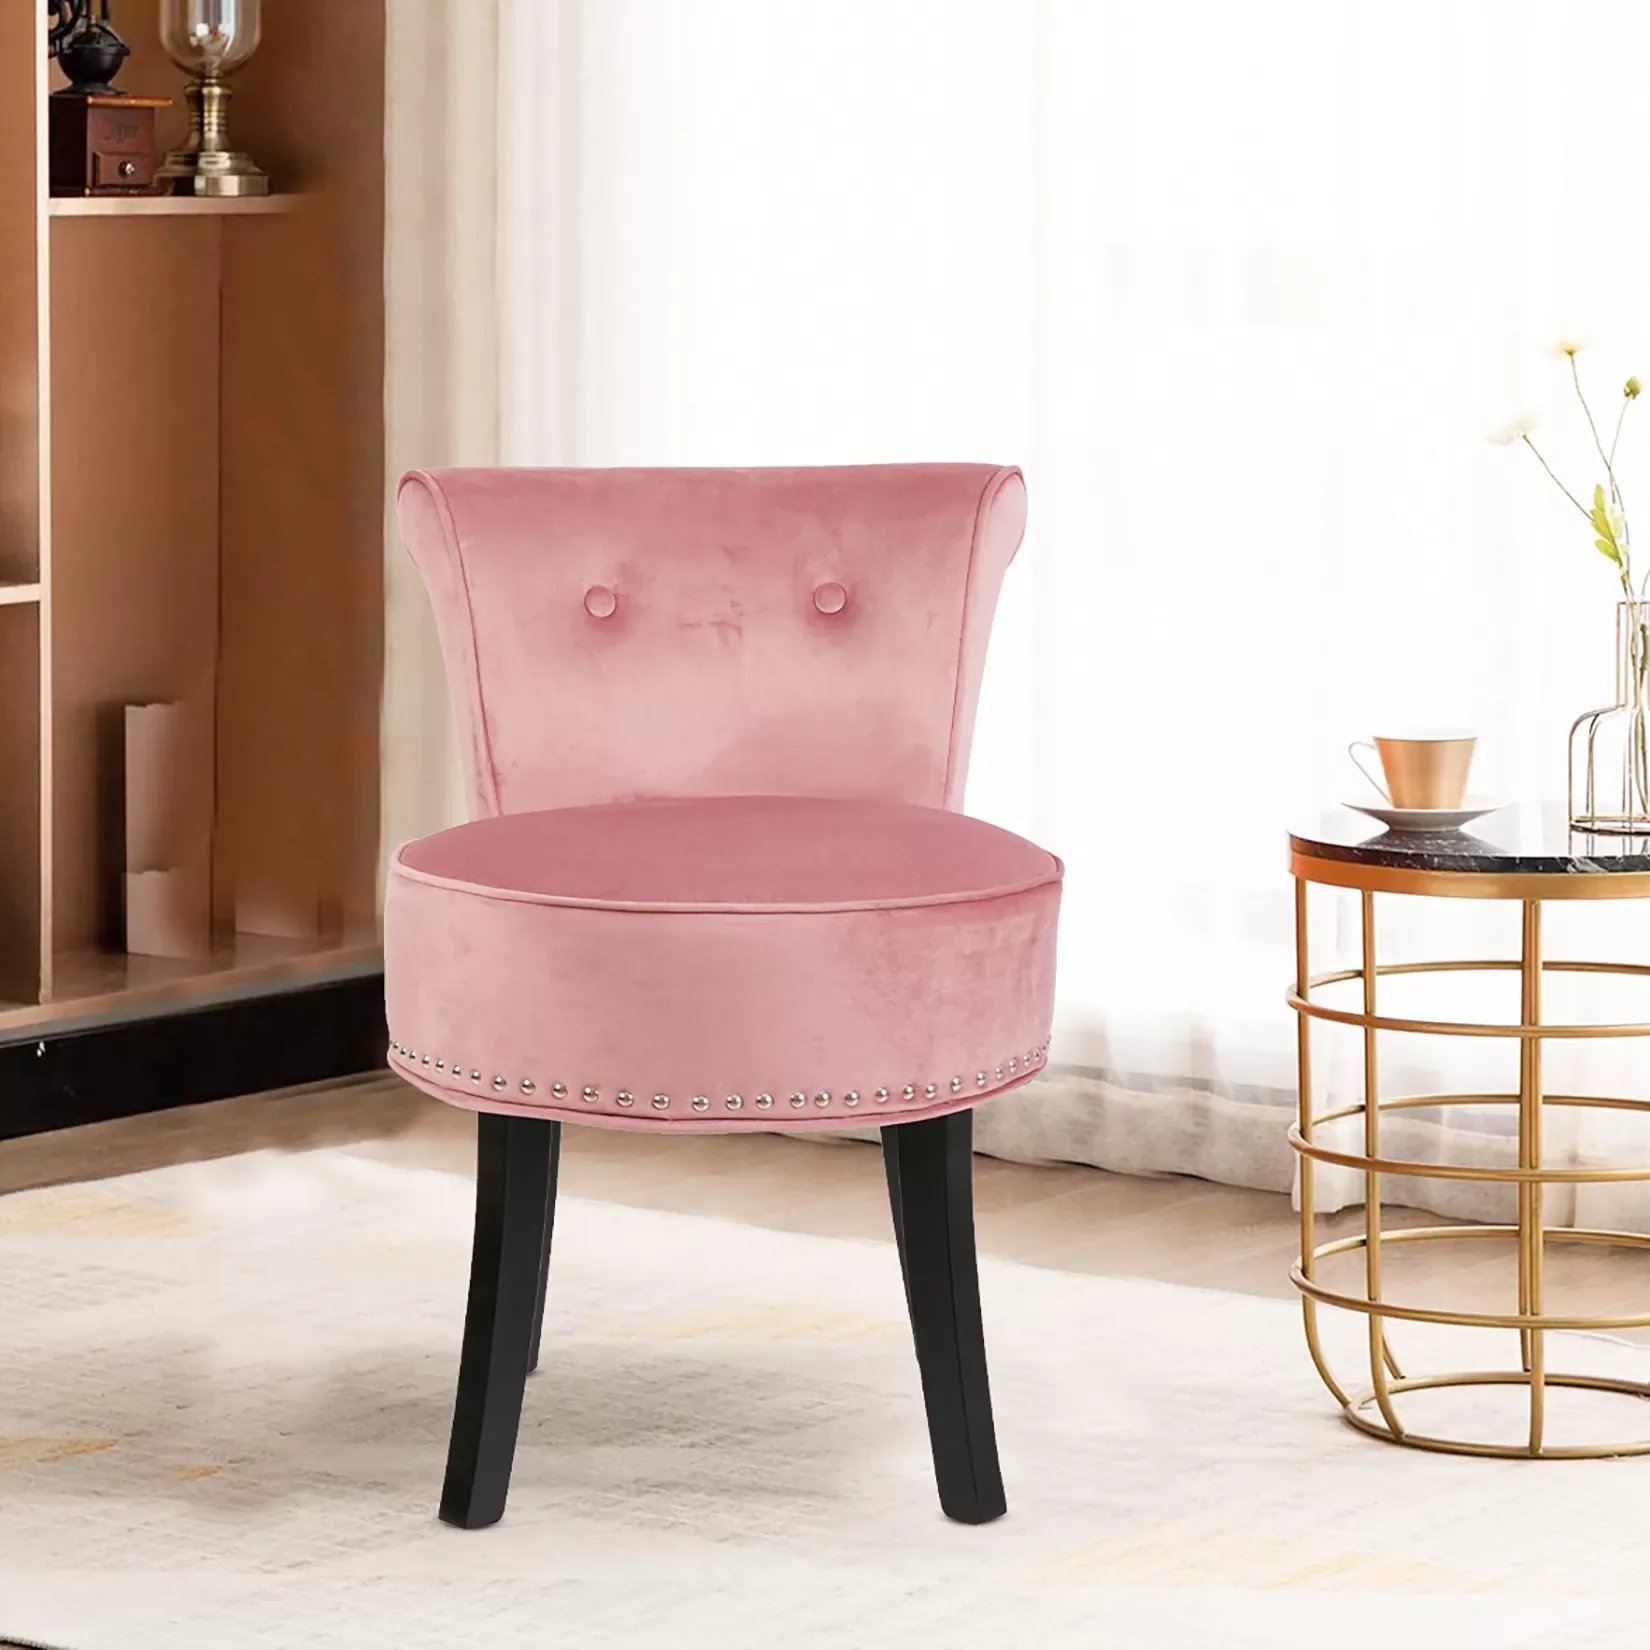 

2023 Vanity Stool Chair Makeup with Upholstered Round Velvet Padded Chair with Wood Legs Grey Pink sofa living room sofas furni